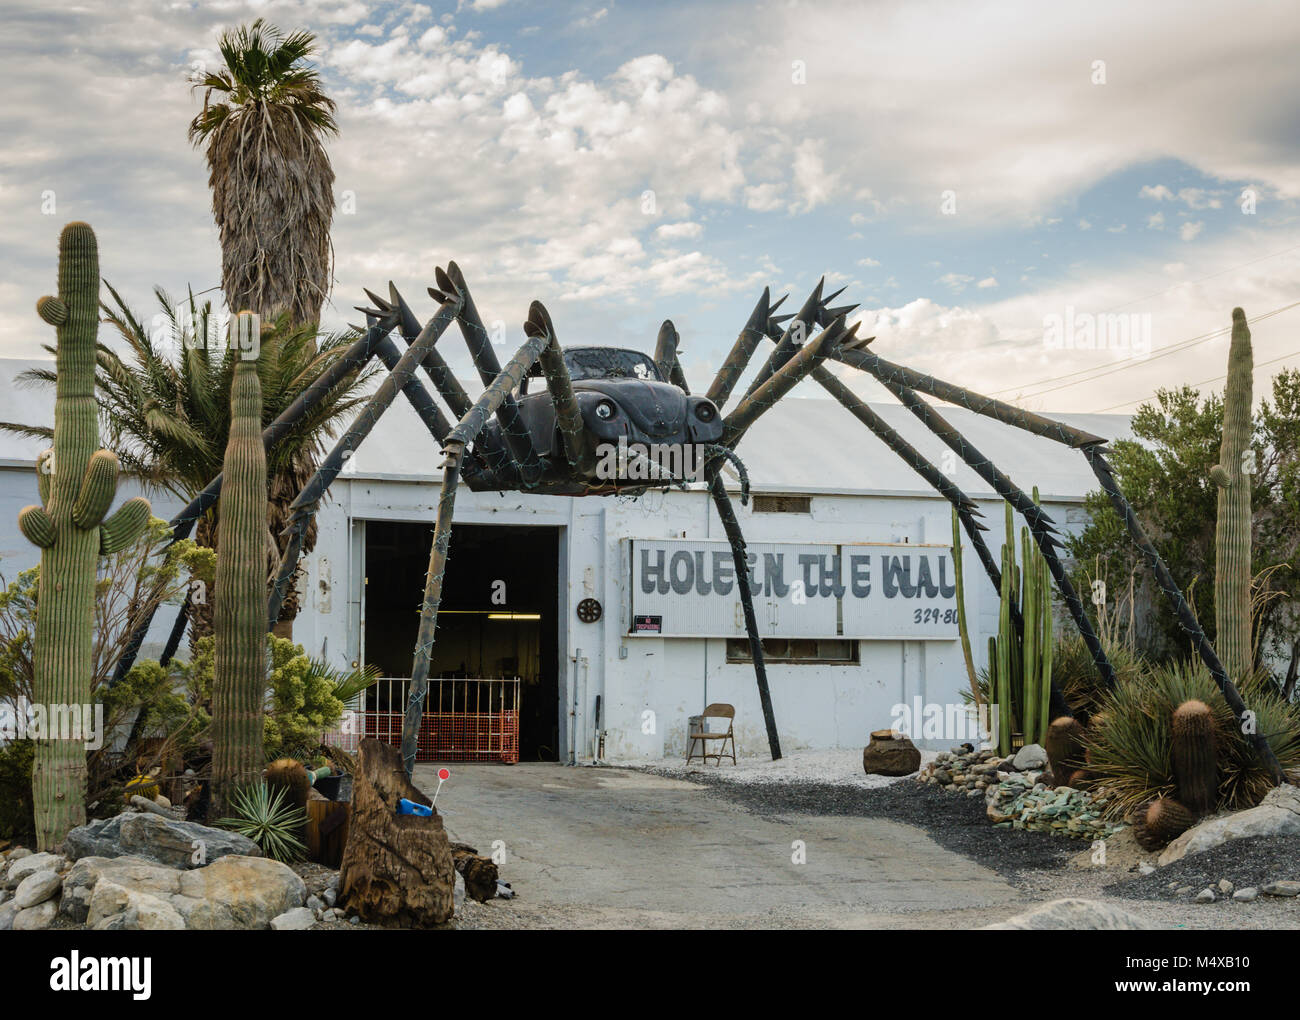 Roadside attraction in the Mojave Desert features a giant black spider welded together with a Volkswagon Bug car at the center. Stock Photo